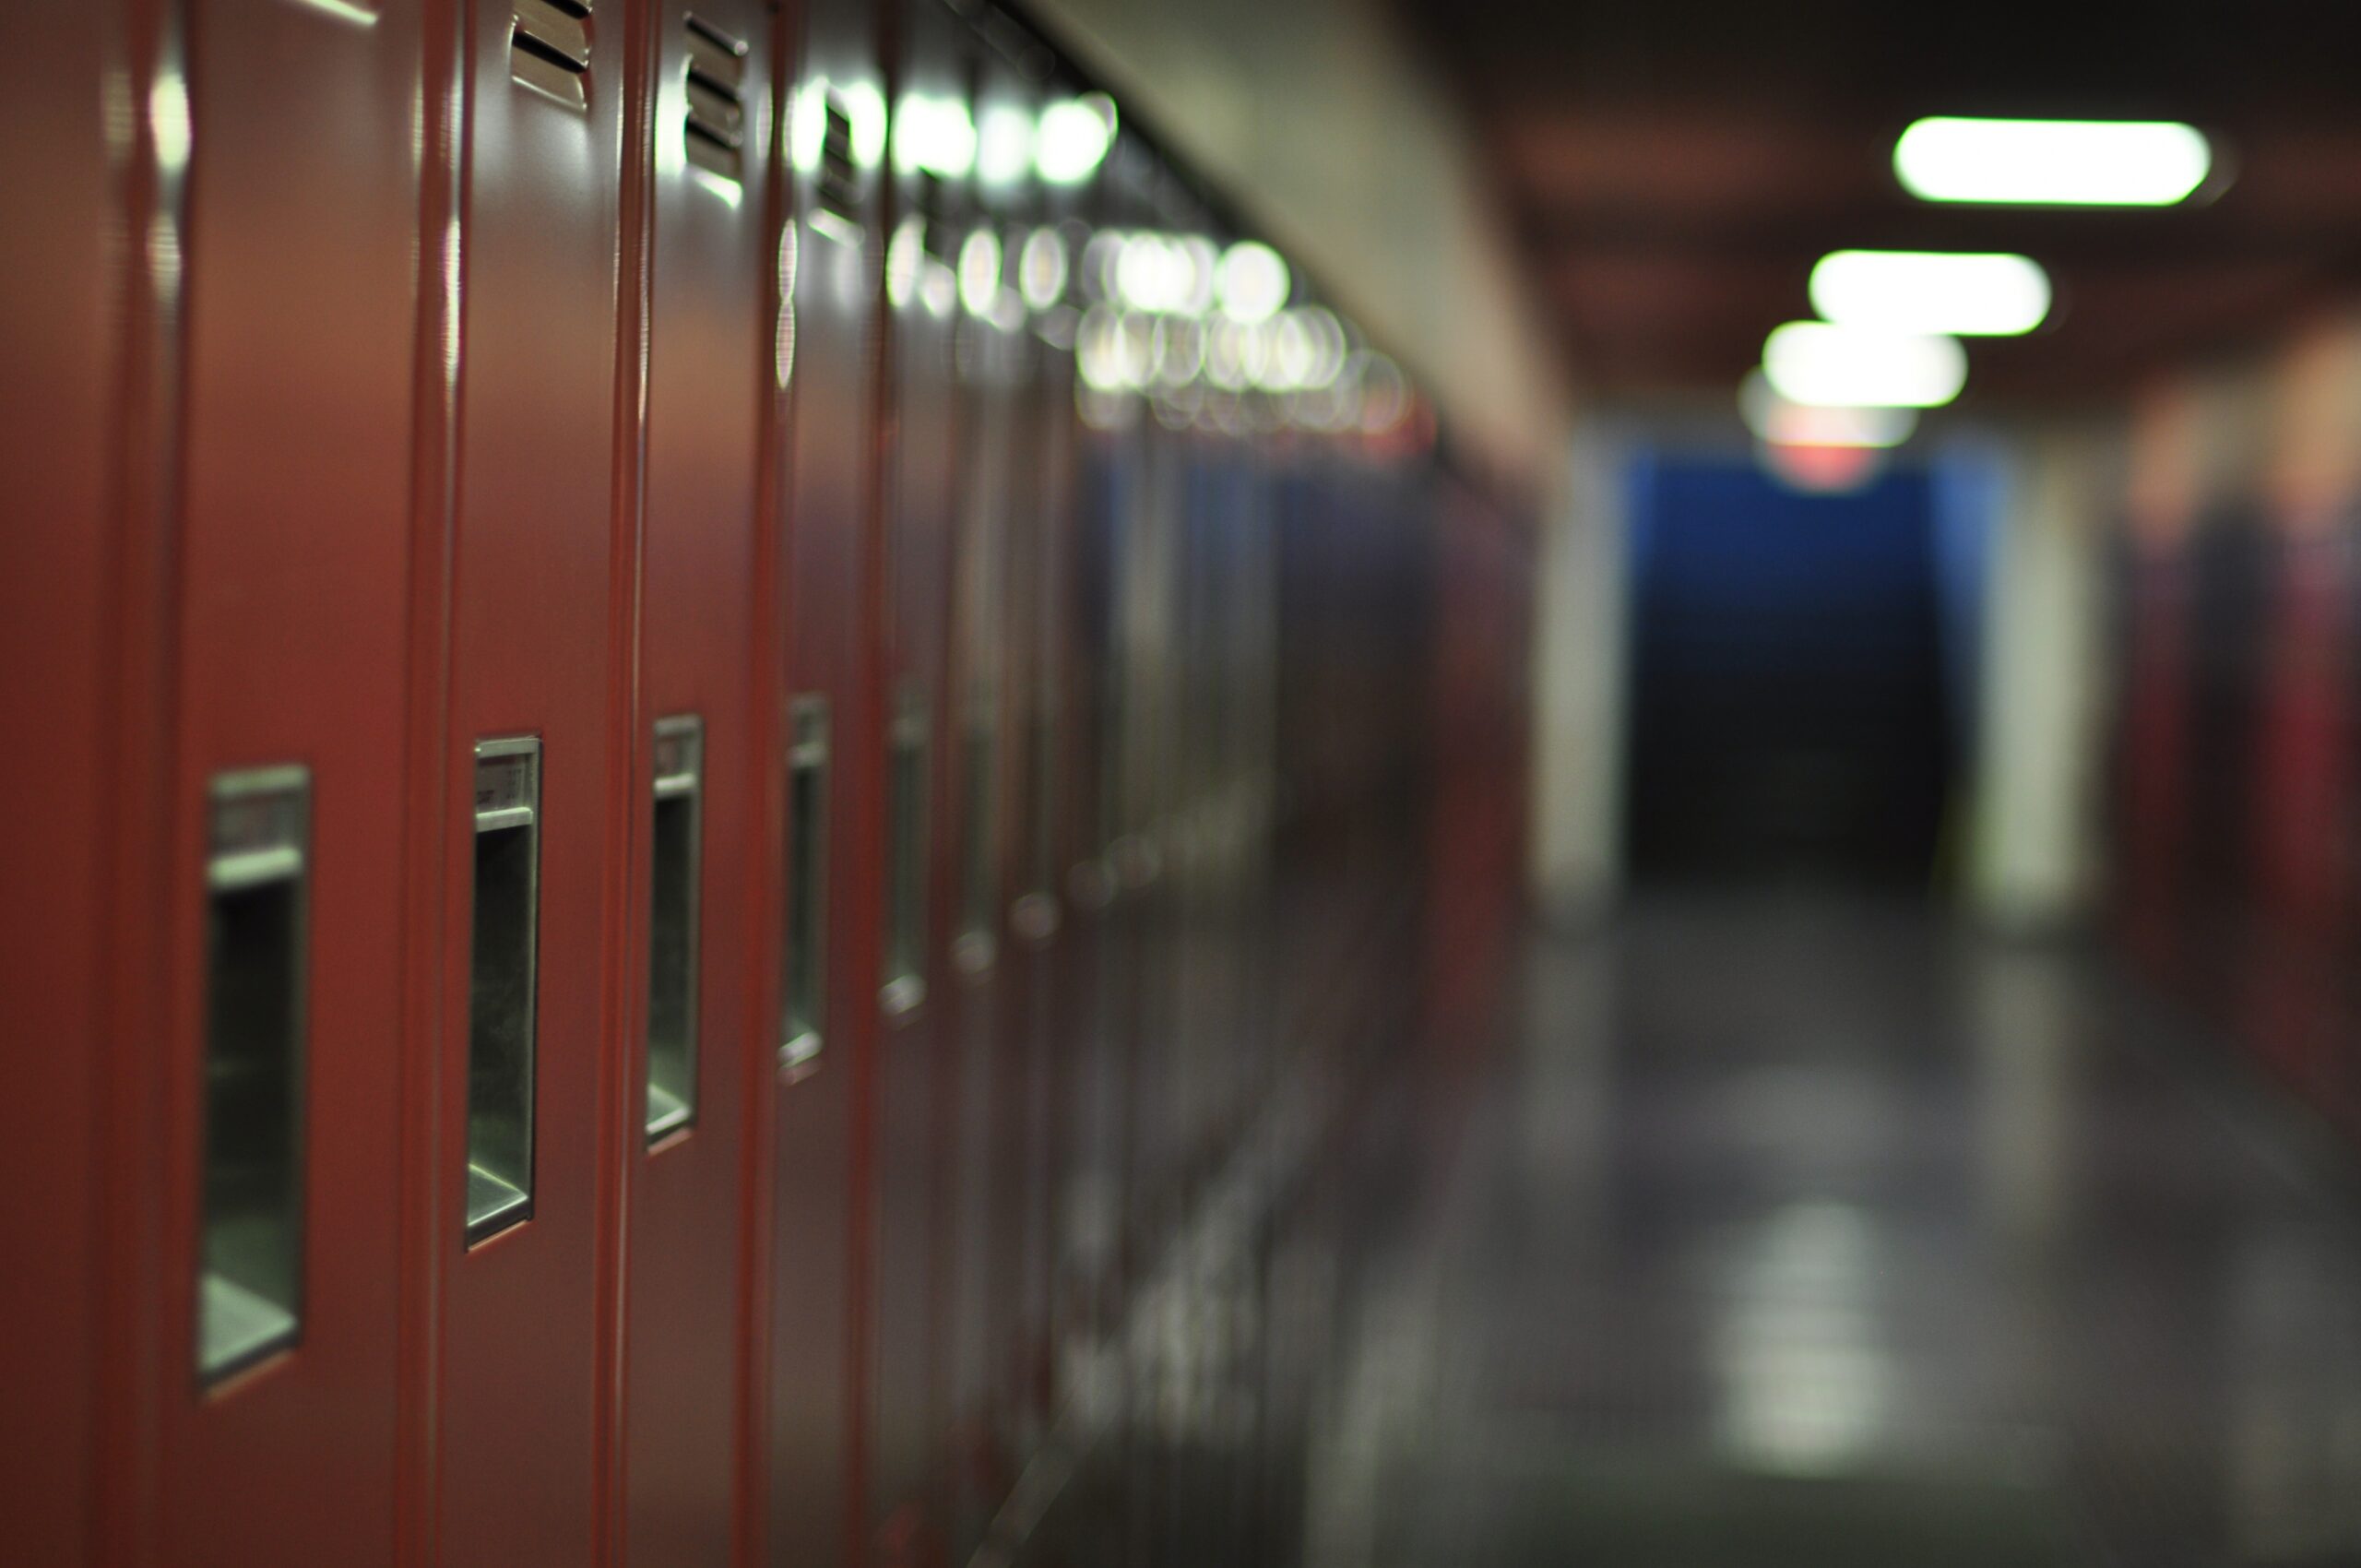 Report: More than 6K instances of physical restraint in Wisconsin schools last year